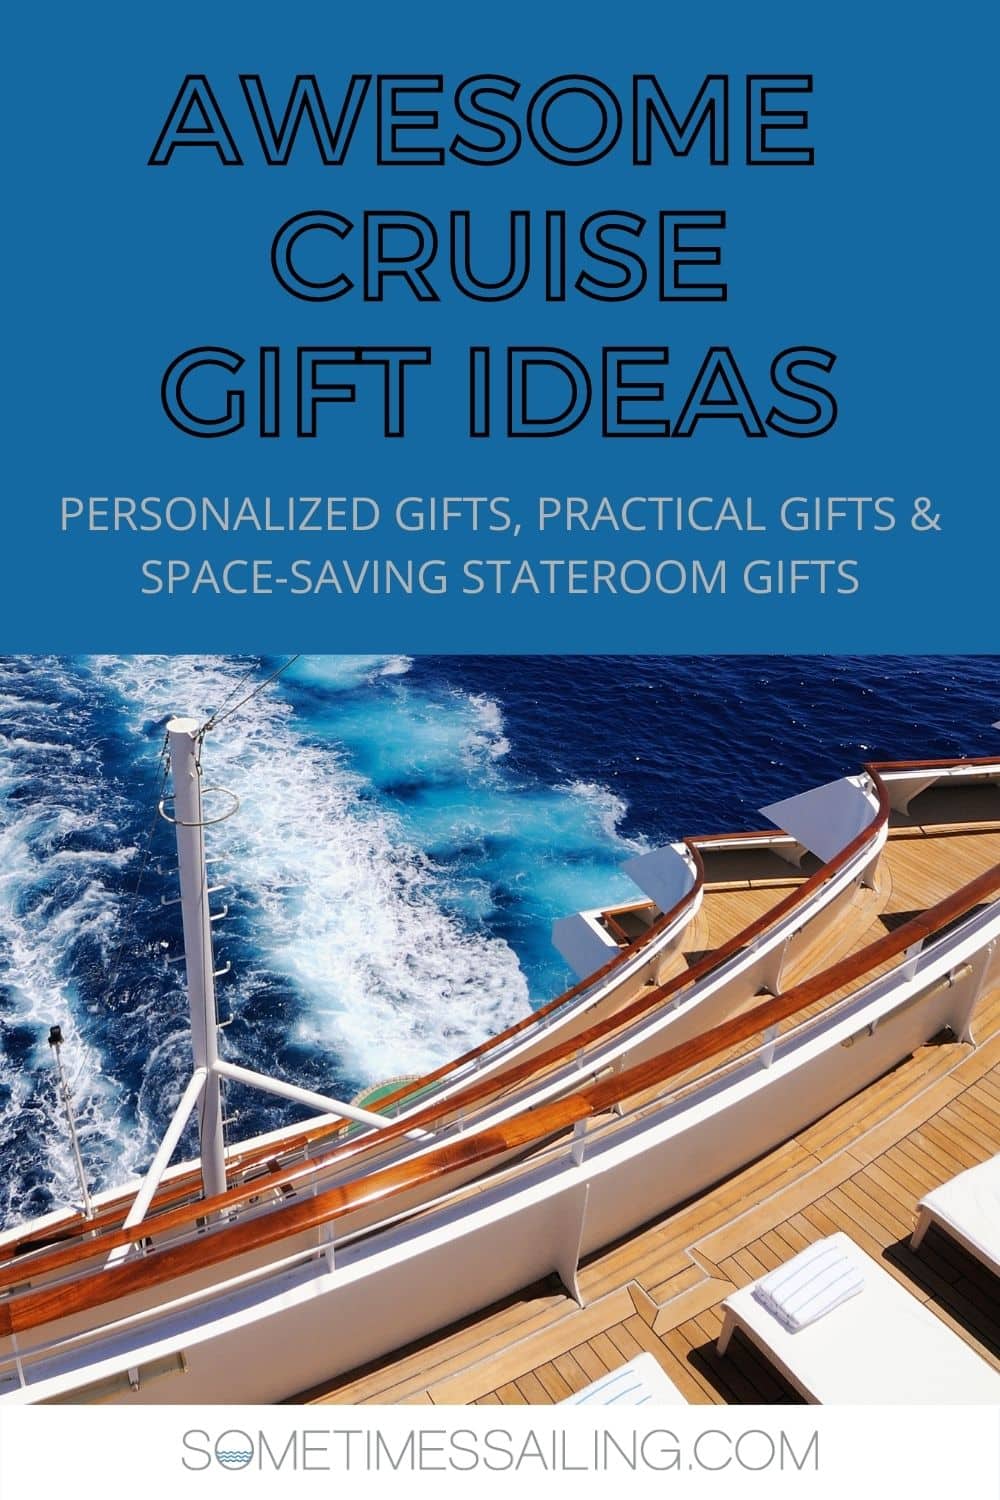 Cruise gift ideas Pinterest image with a blue block and text and photo of the wake of a cruise ship.